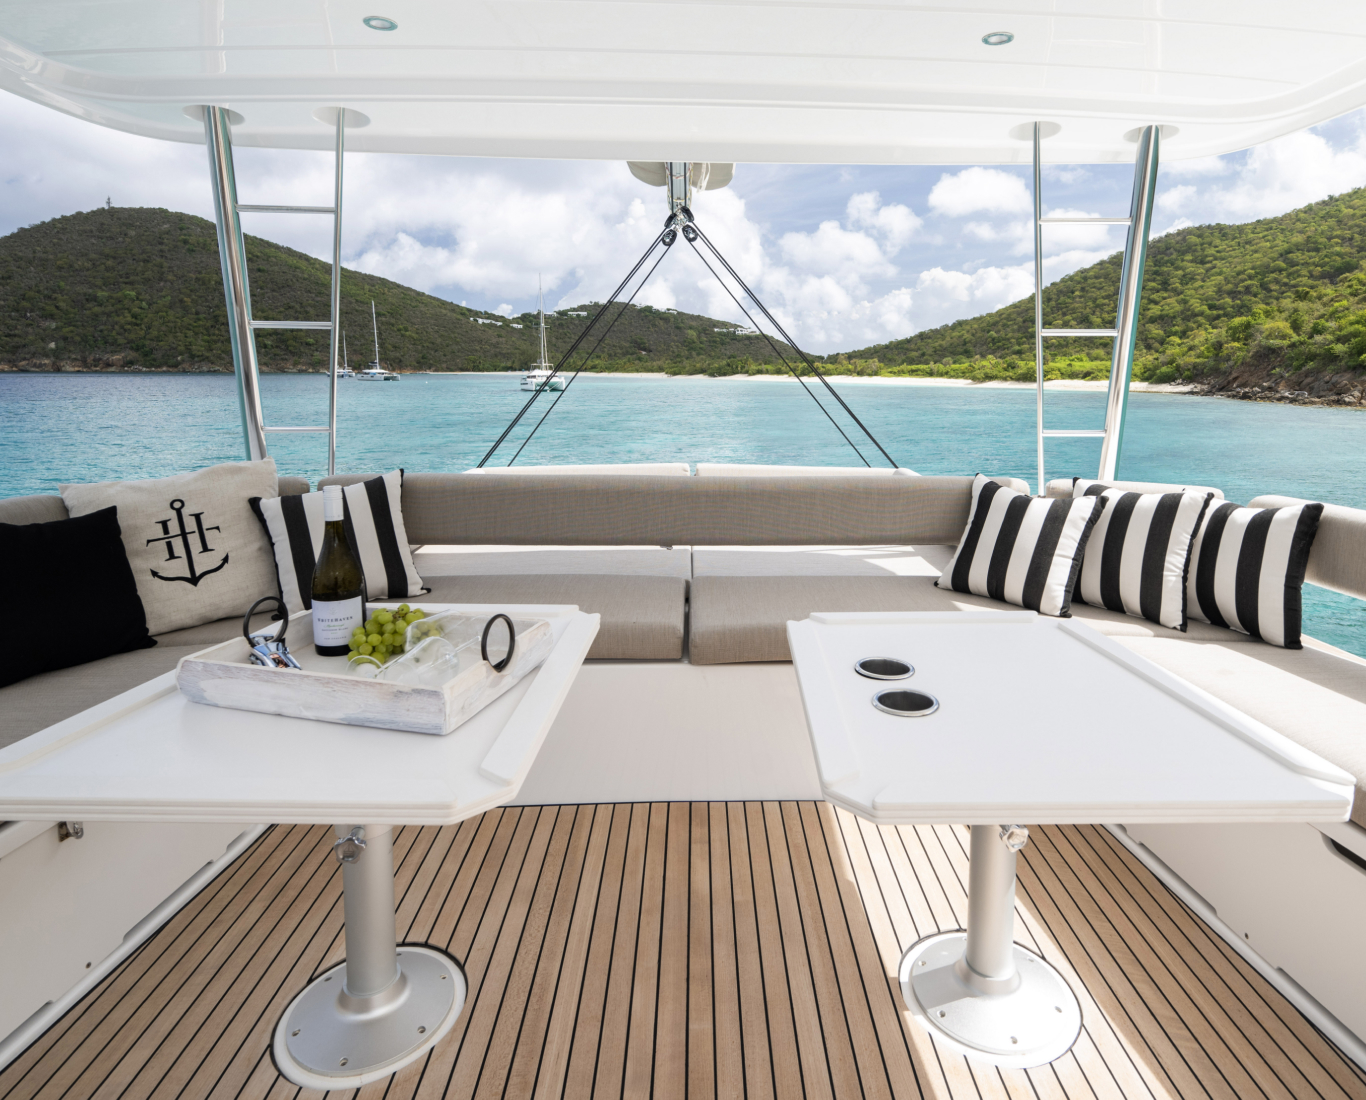 tables in the rear of a yacht in tropical water